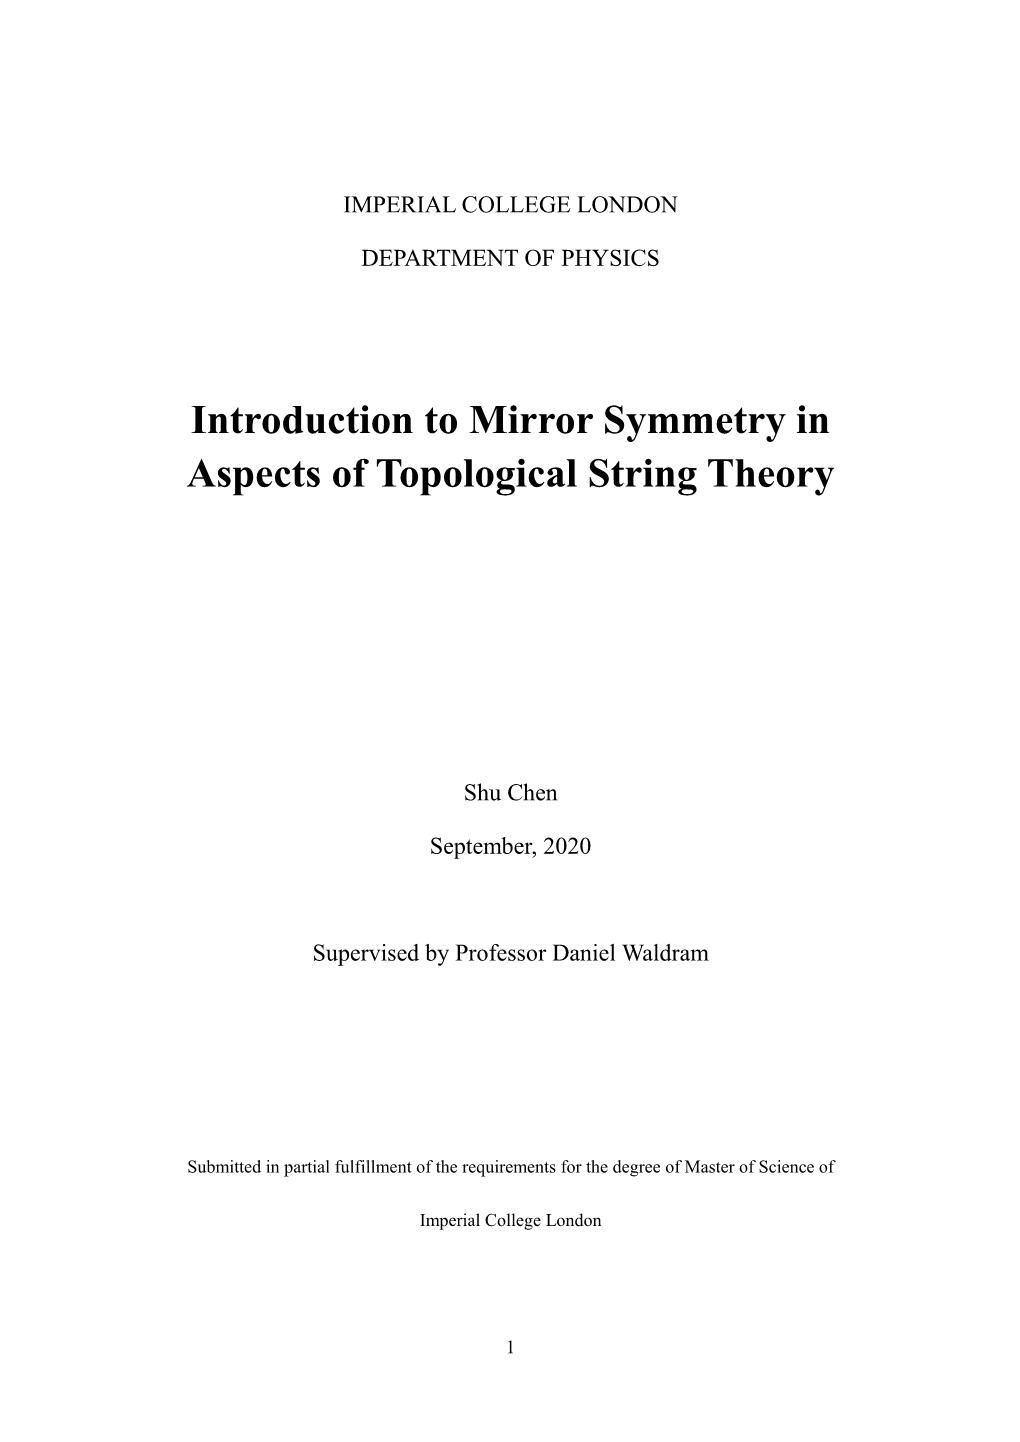 Introduction to Mirror Symmetry in Aspects of Topological String Theory